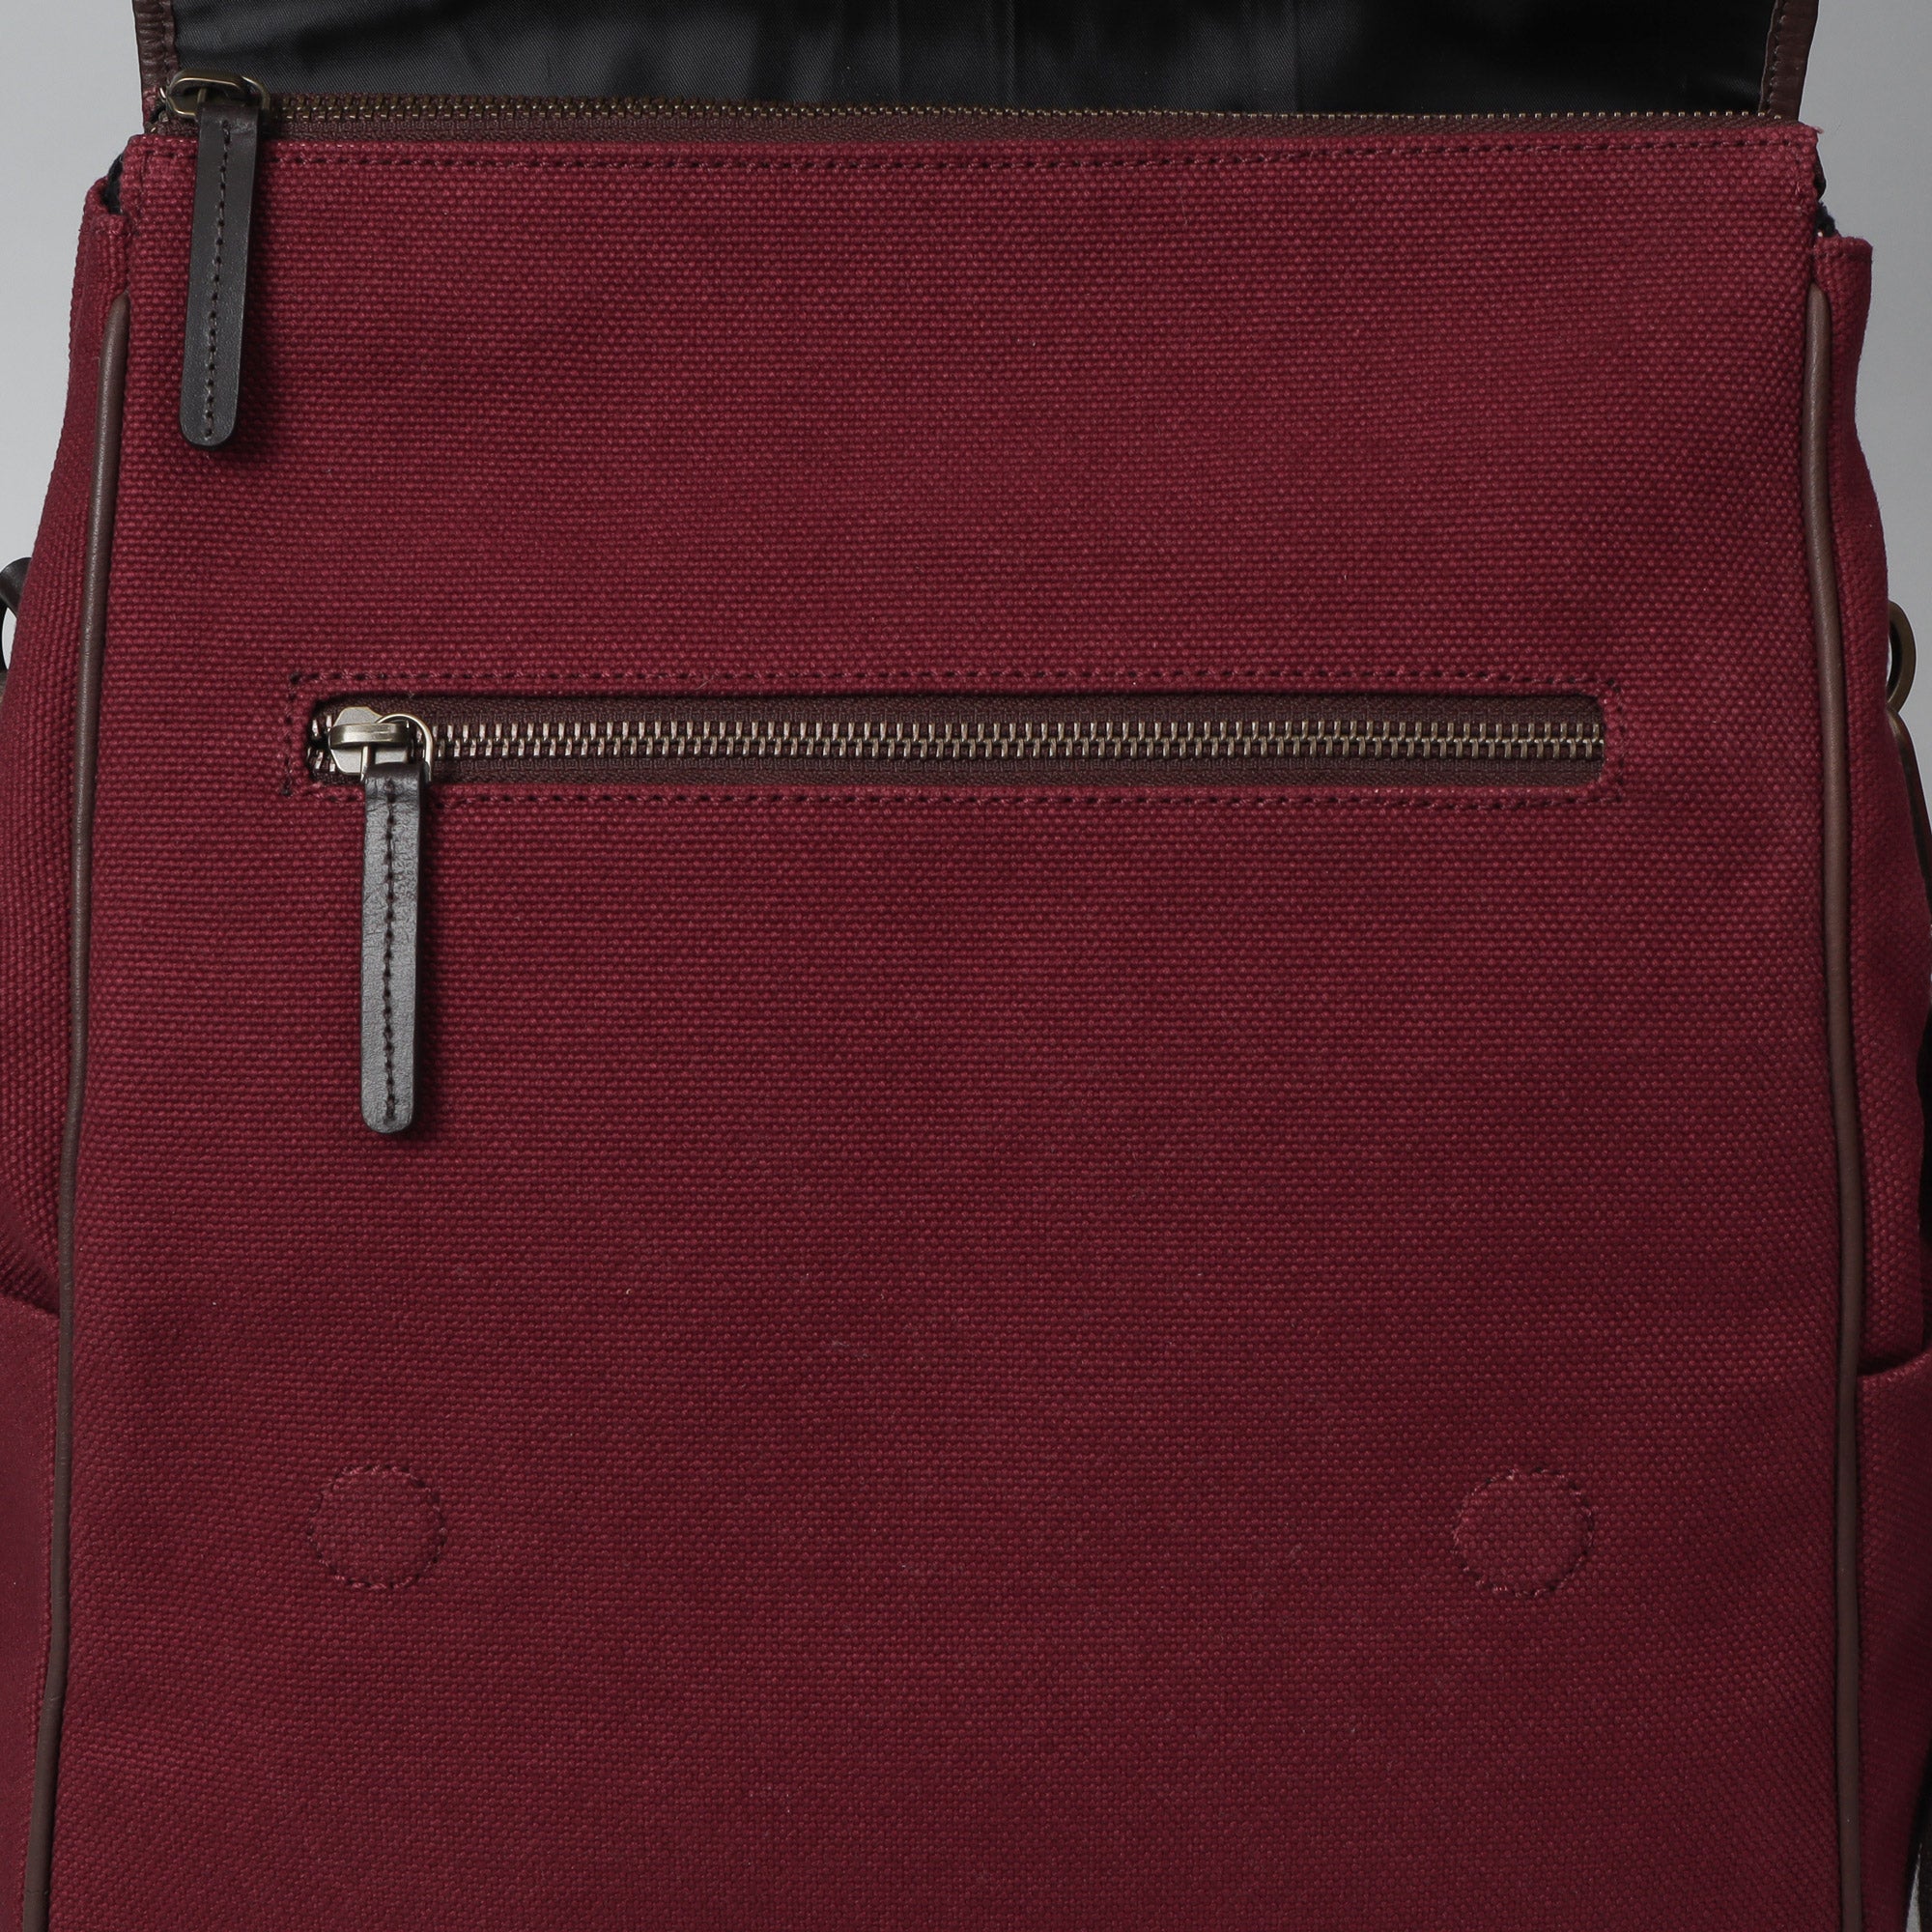 Maroon canvas diaper bag with YKK zippers